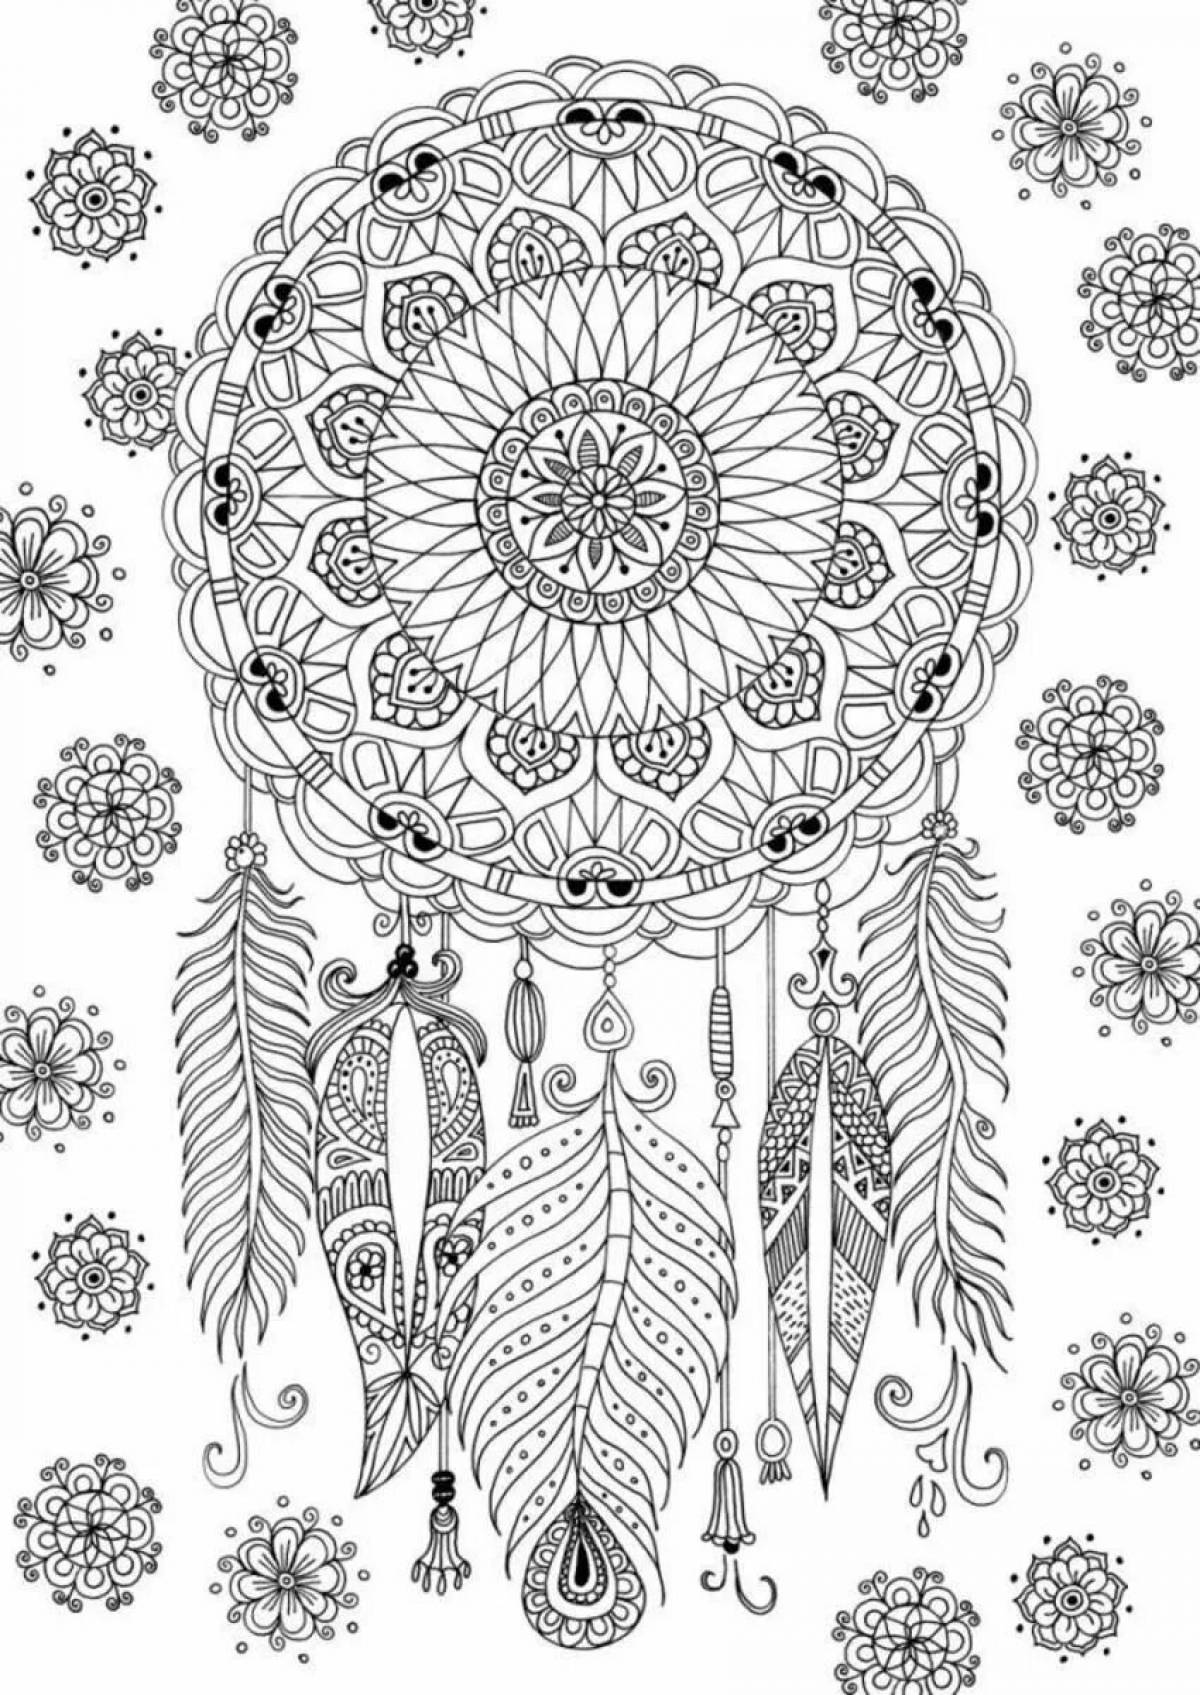 Animated psychological coloring book for adults